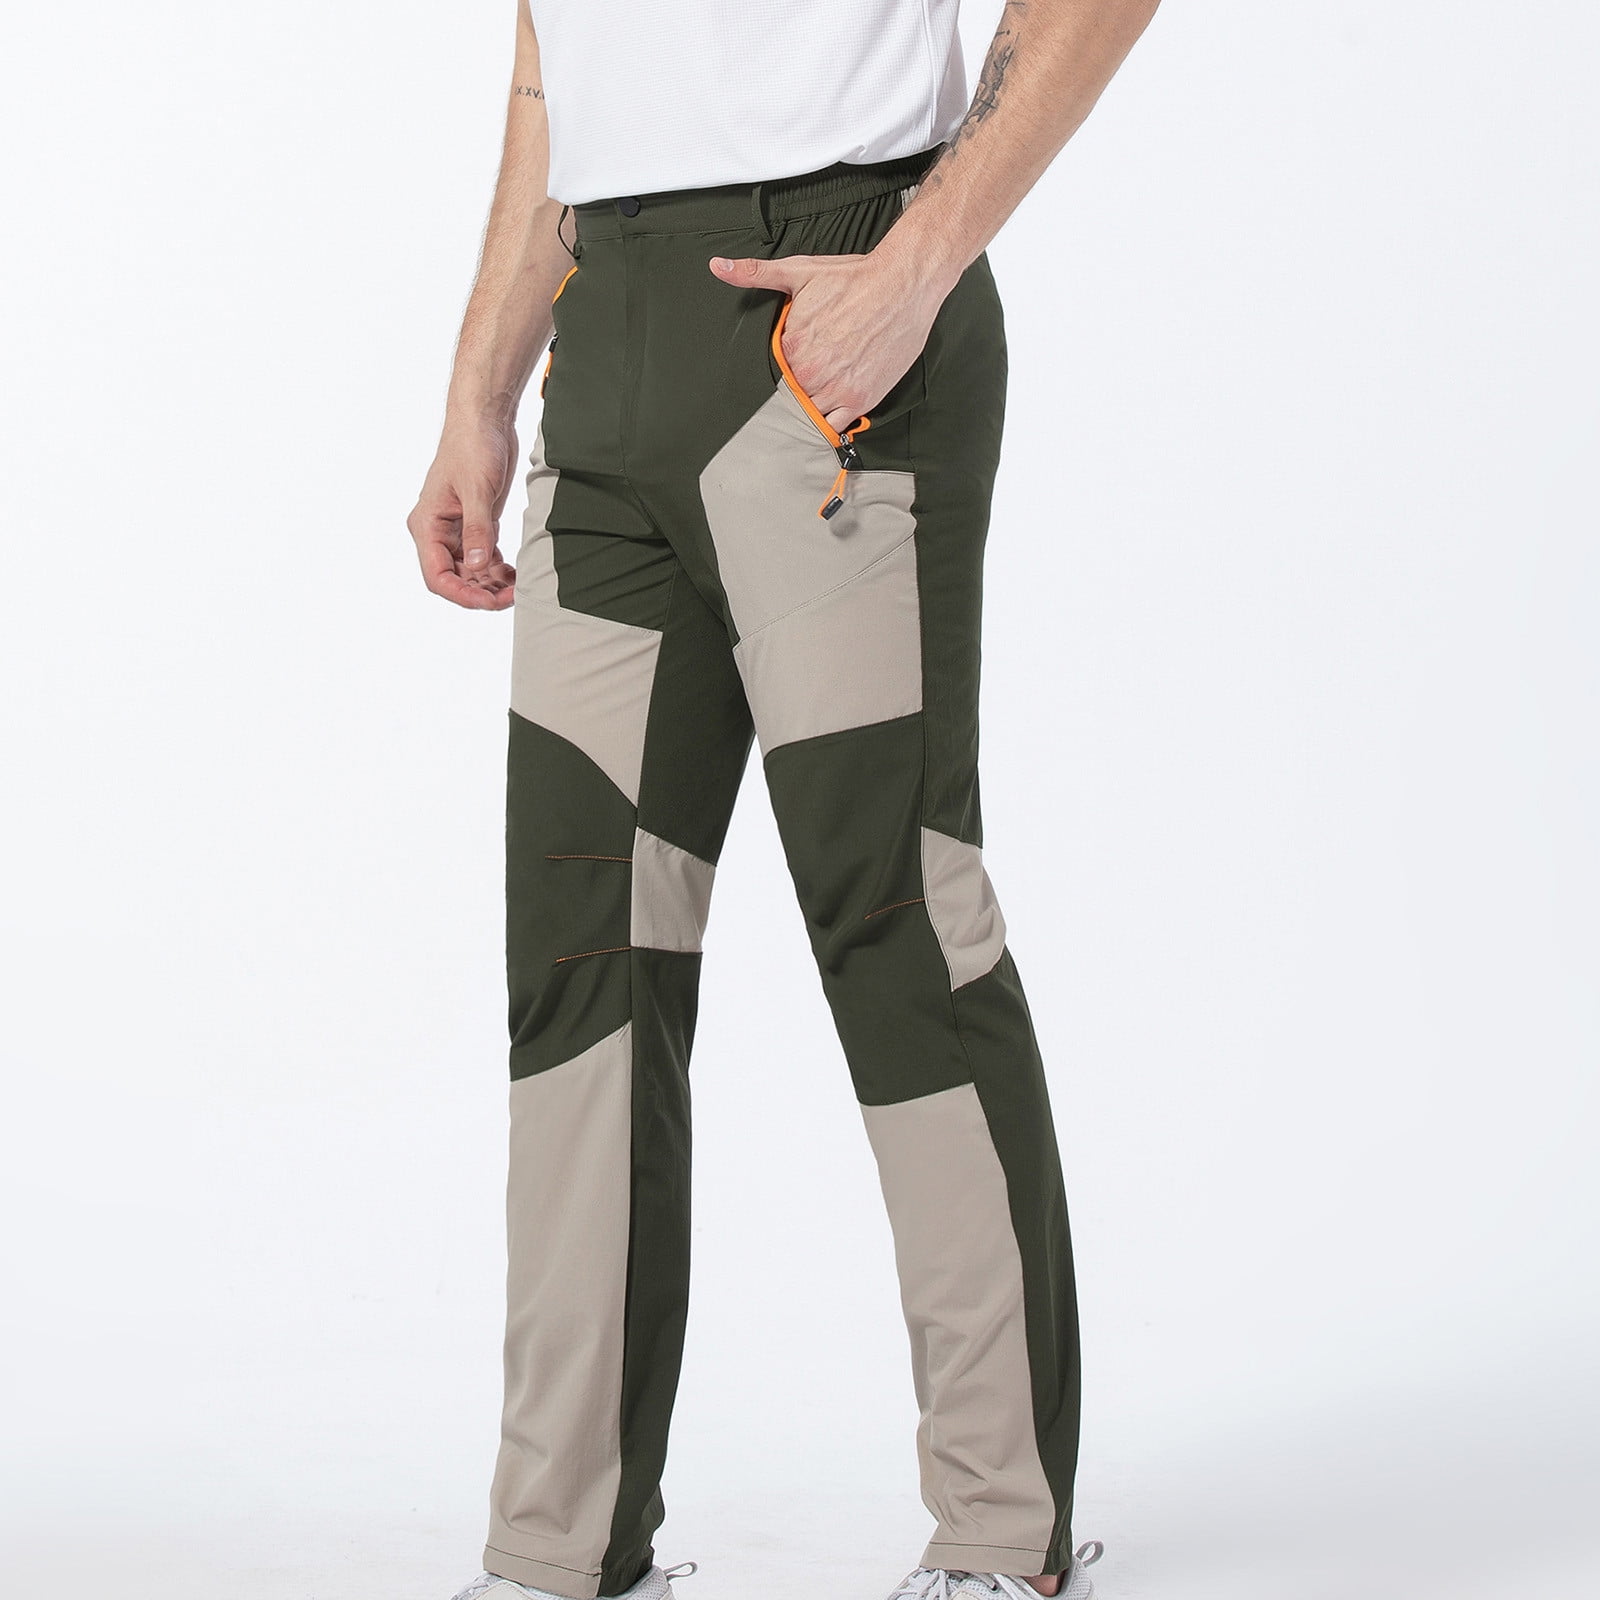 Jacenvly Mens Cargo Pants Clearance Contrast Color High Waisted